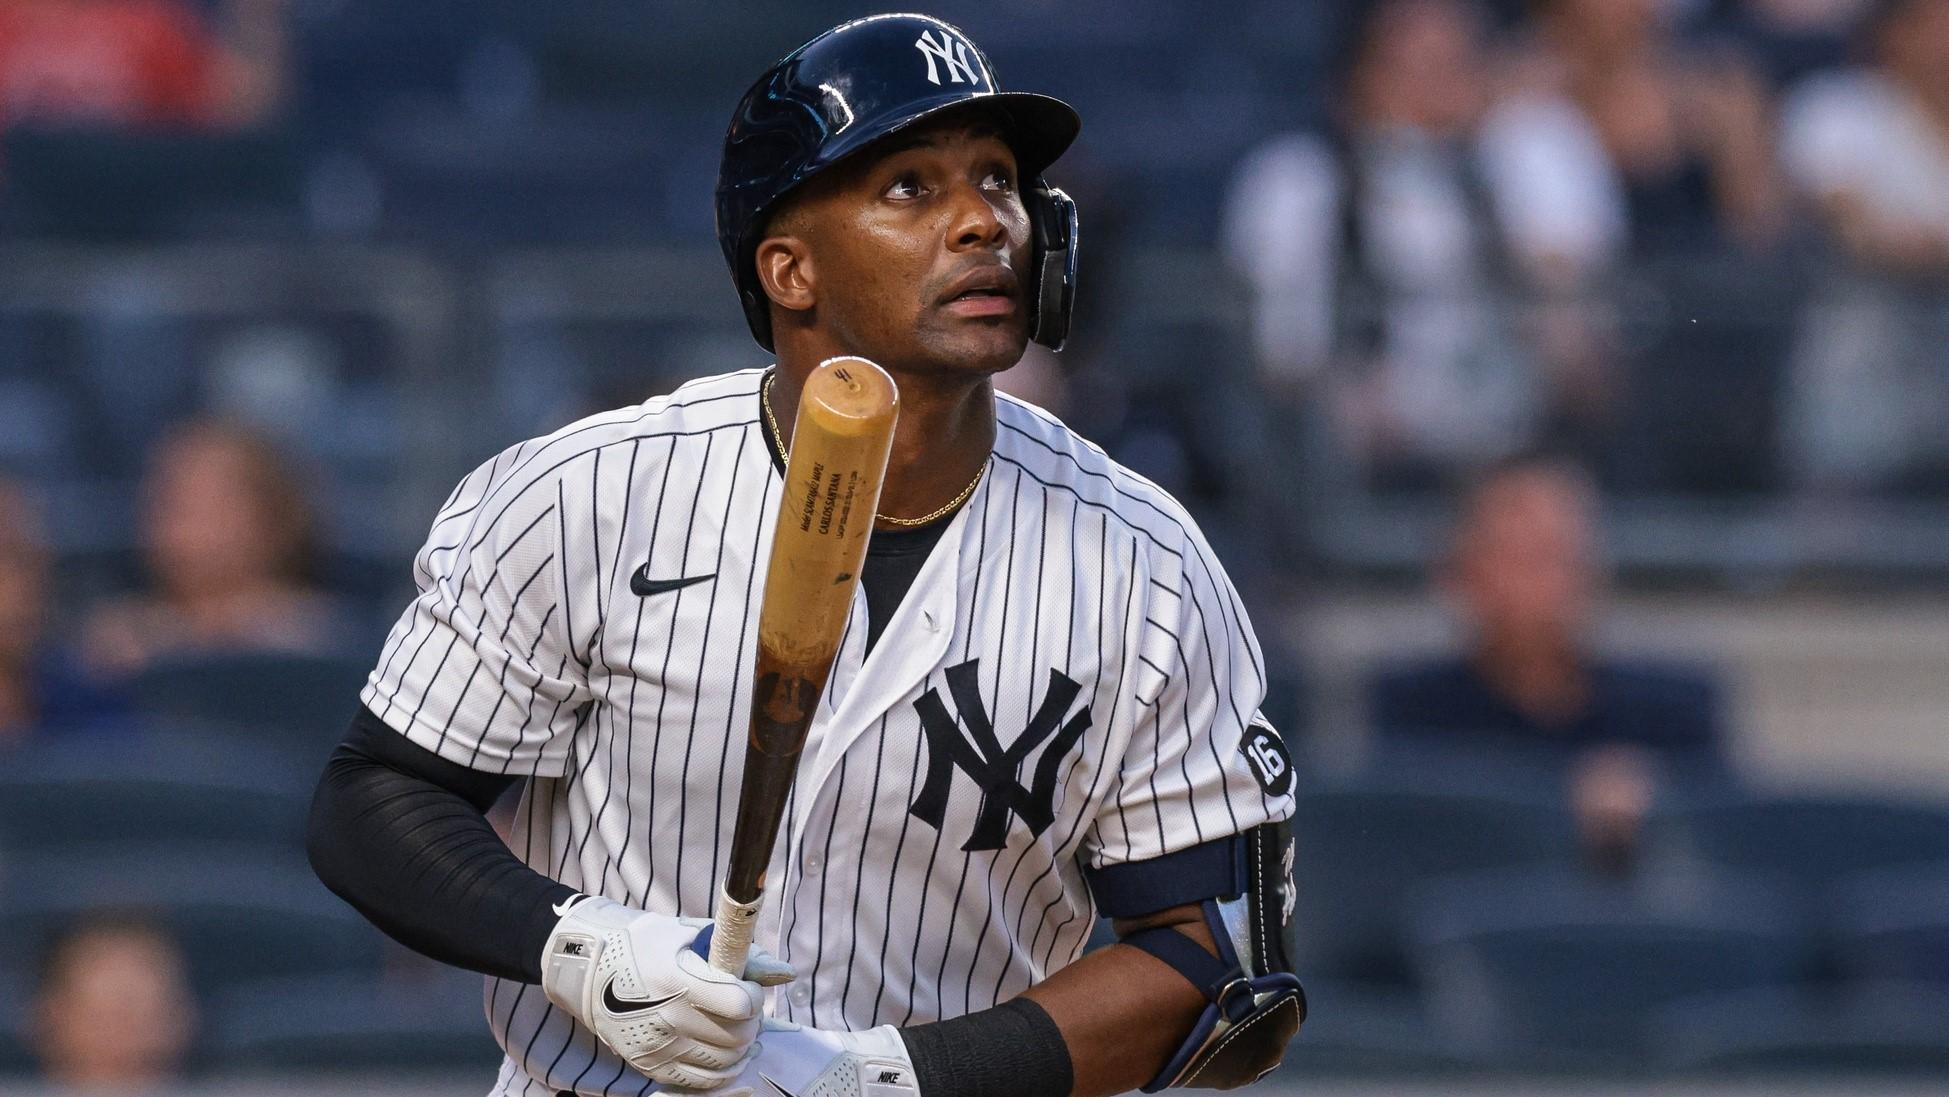 Jun 29, 2021; Bronx, New York, USA; New York Yankees third baseman Miguel Andujar (41) watches his home run during the fourth inning against the Los Angeles Angels at Yankee Stadium. / Vincent Carchietta-USA TODAY Sports